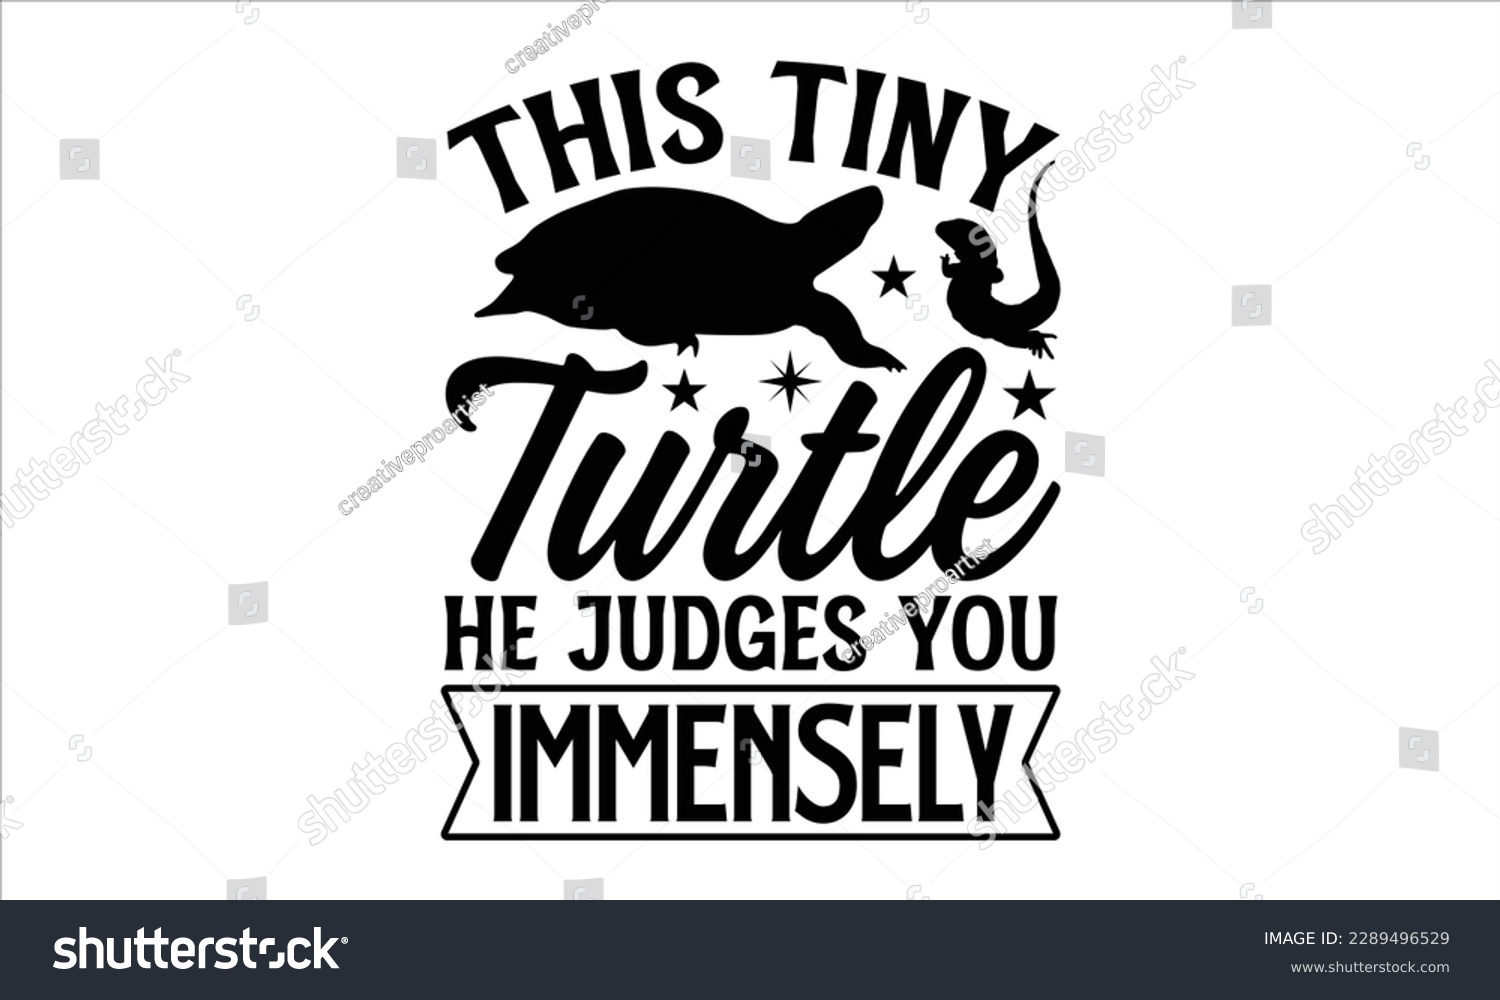 SVG of this tiny turtle he judges you immensely- Reptiles t shirt design, Hand written vector svg for Cutting Machine, Silhouette Cameo, Cricut, Vector illustration Template eps 10 svg